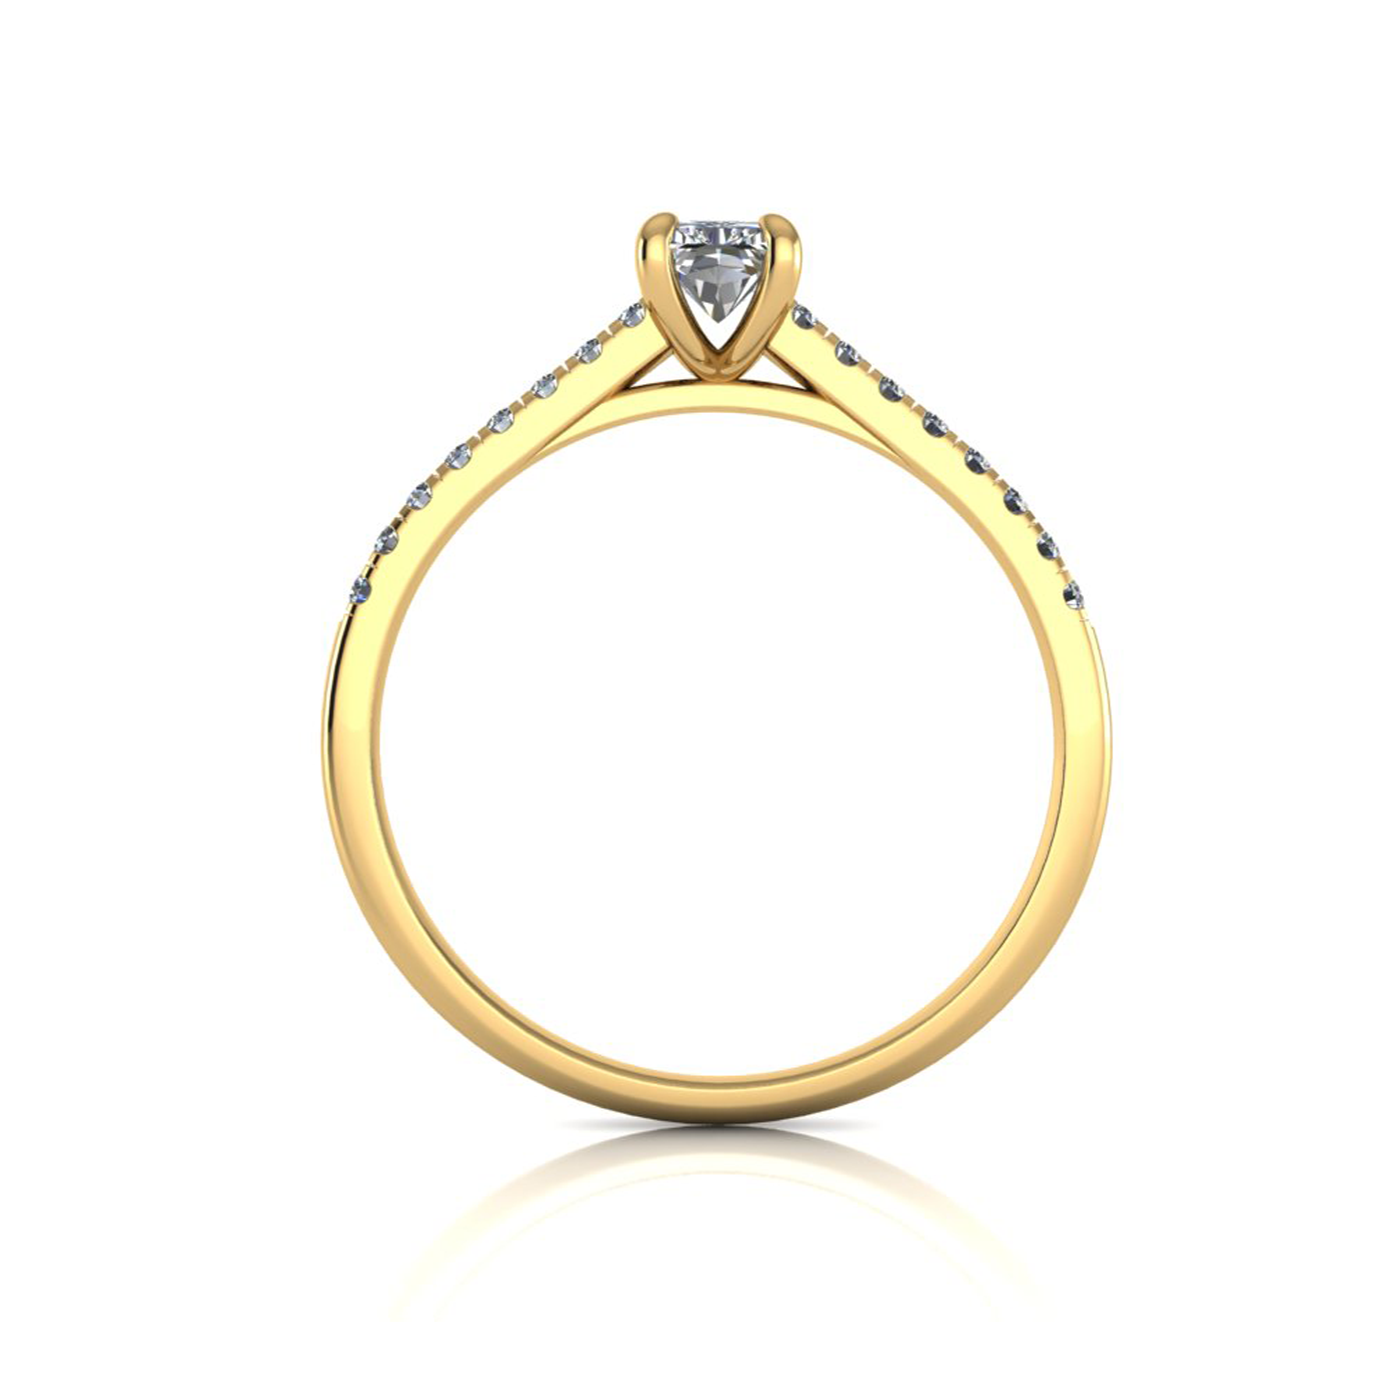 18k yellow gold  0,50 ct 4 prongs radiant cut diamond engagement ring with whisper thin pavÉ set band